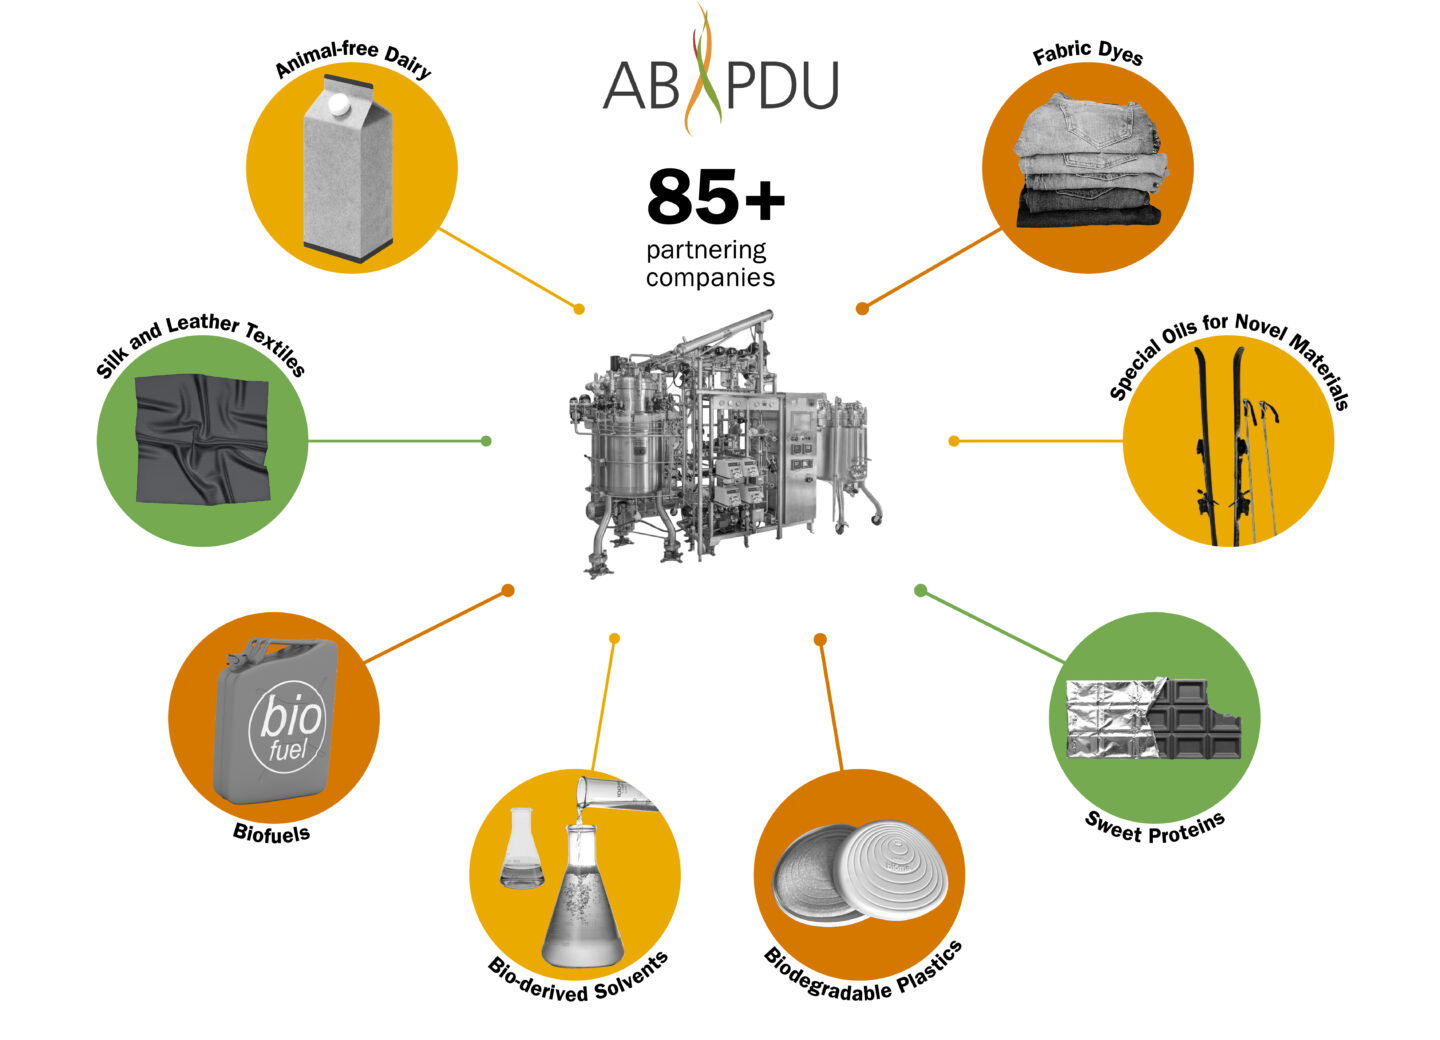 An infographic that uses small photo icons to show the range of biomanufactured products that ABPDU scientists have helped develop and scale-up. The icons include folded clothing, a pair of skis, a bar of chocolate, a soap dish, a flask of chemicals, a canister of biofuel, a sheet of silk-like fabric, and a carton of milk alternative.